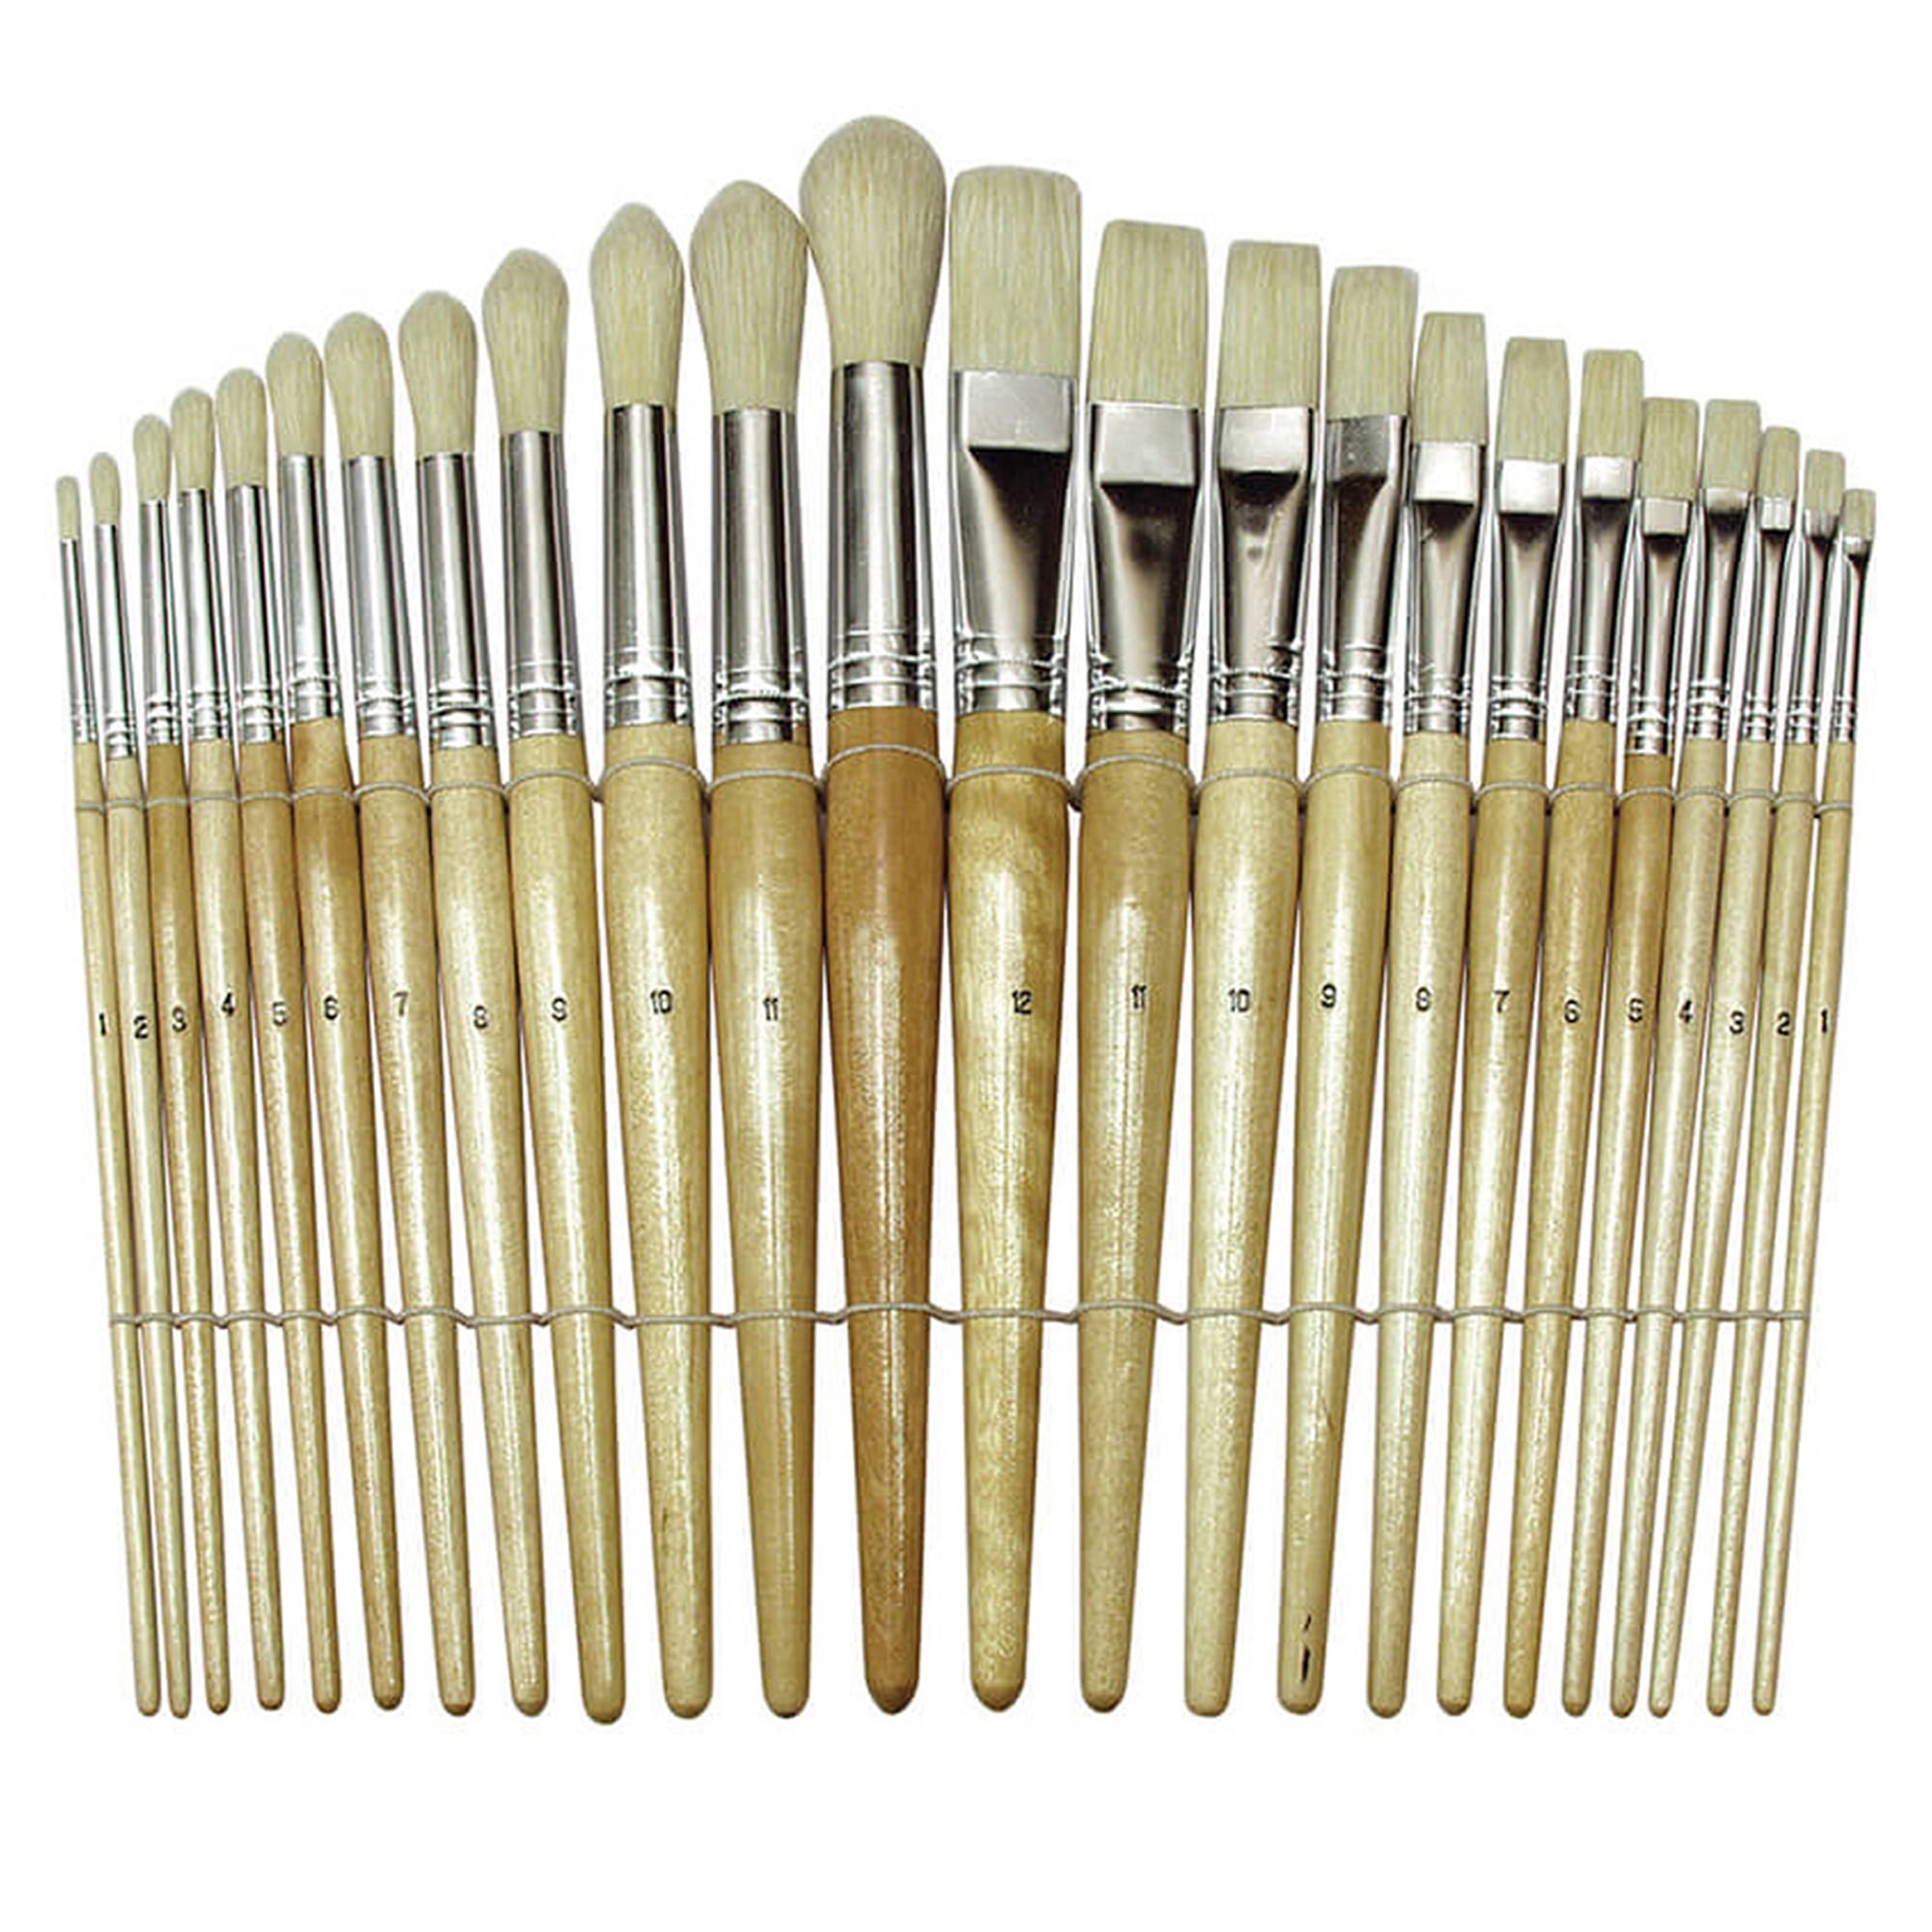 15 Piece Artist Paint Brush Set Flat & Tipped Different Size & Length Brushes 